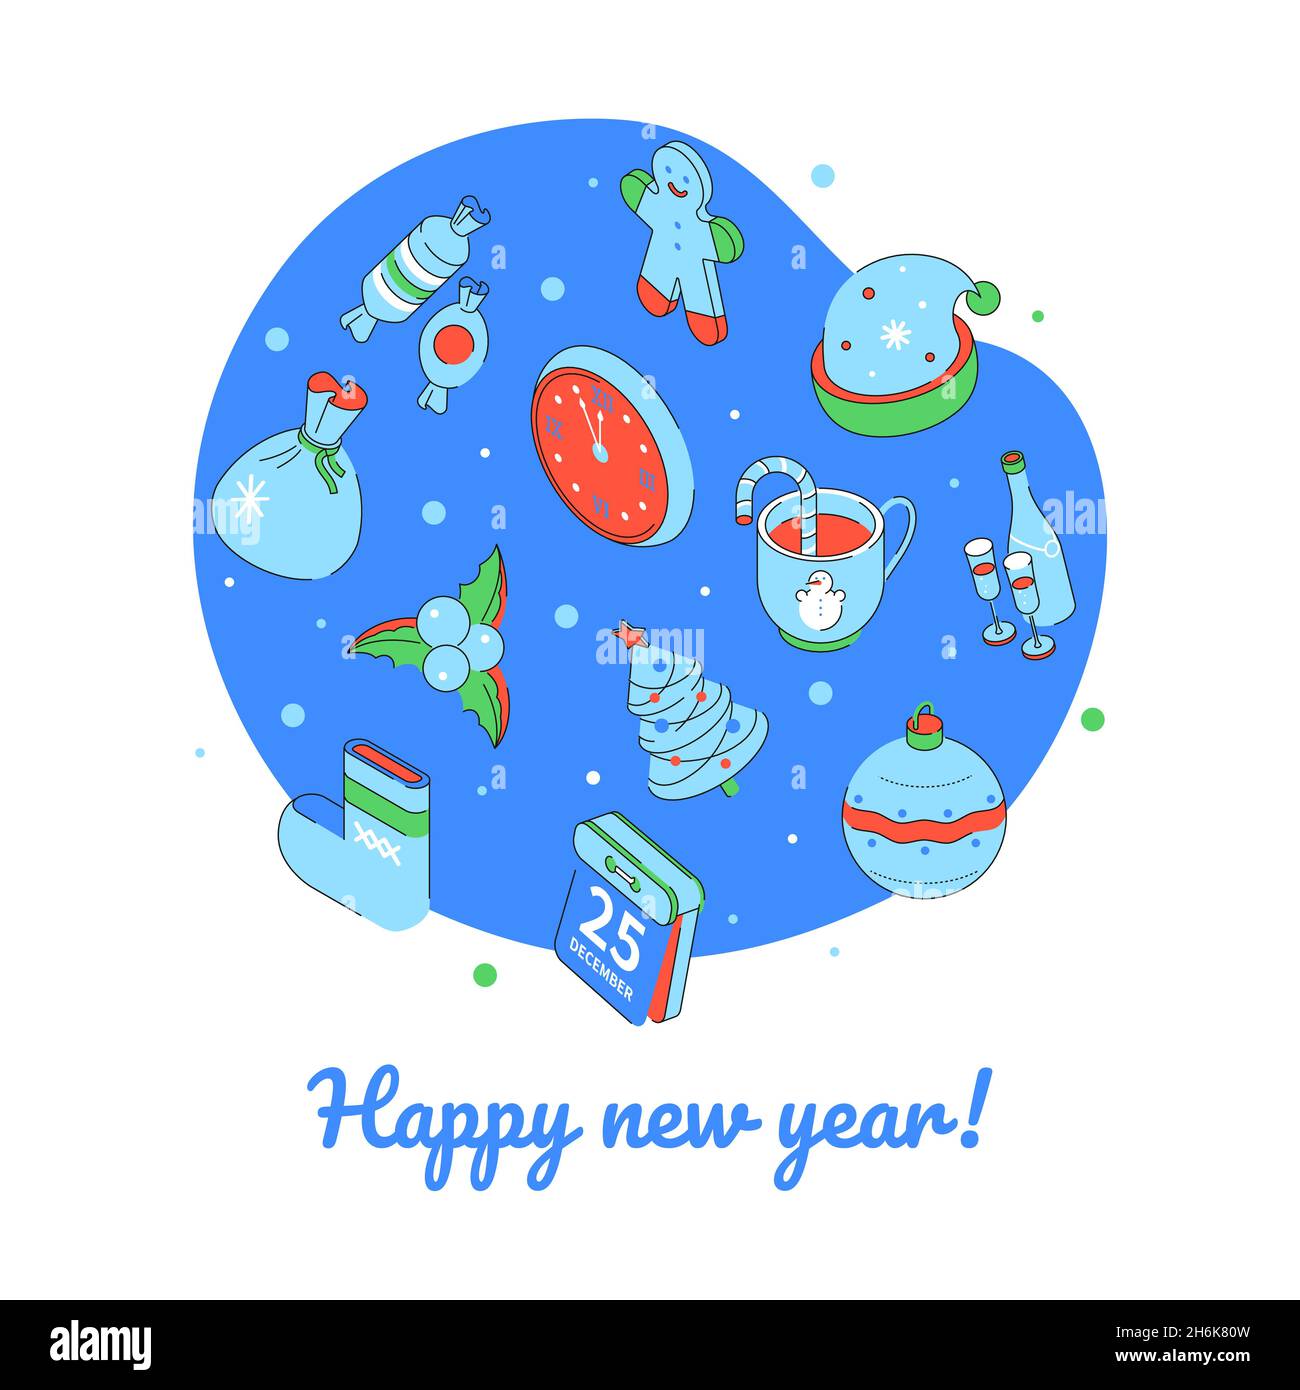 Happy New Year - modern colorful isometric illustration. Calendar, gingerbread man, clock, fir tree holiday symbols. Party decorations, champagne, hot Stock Vector